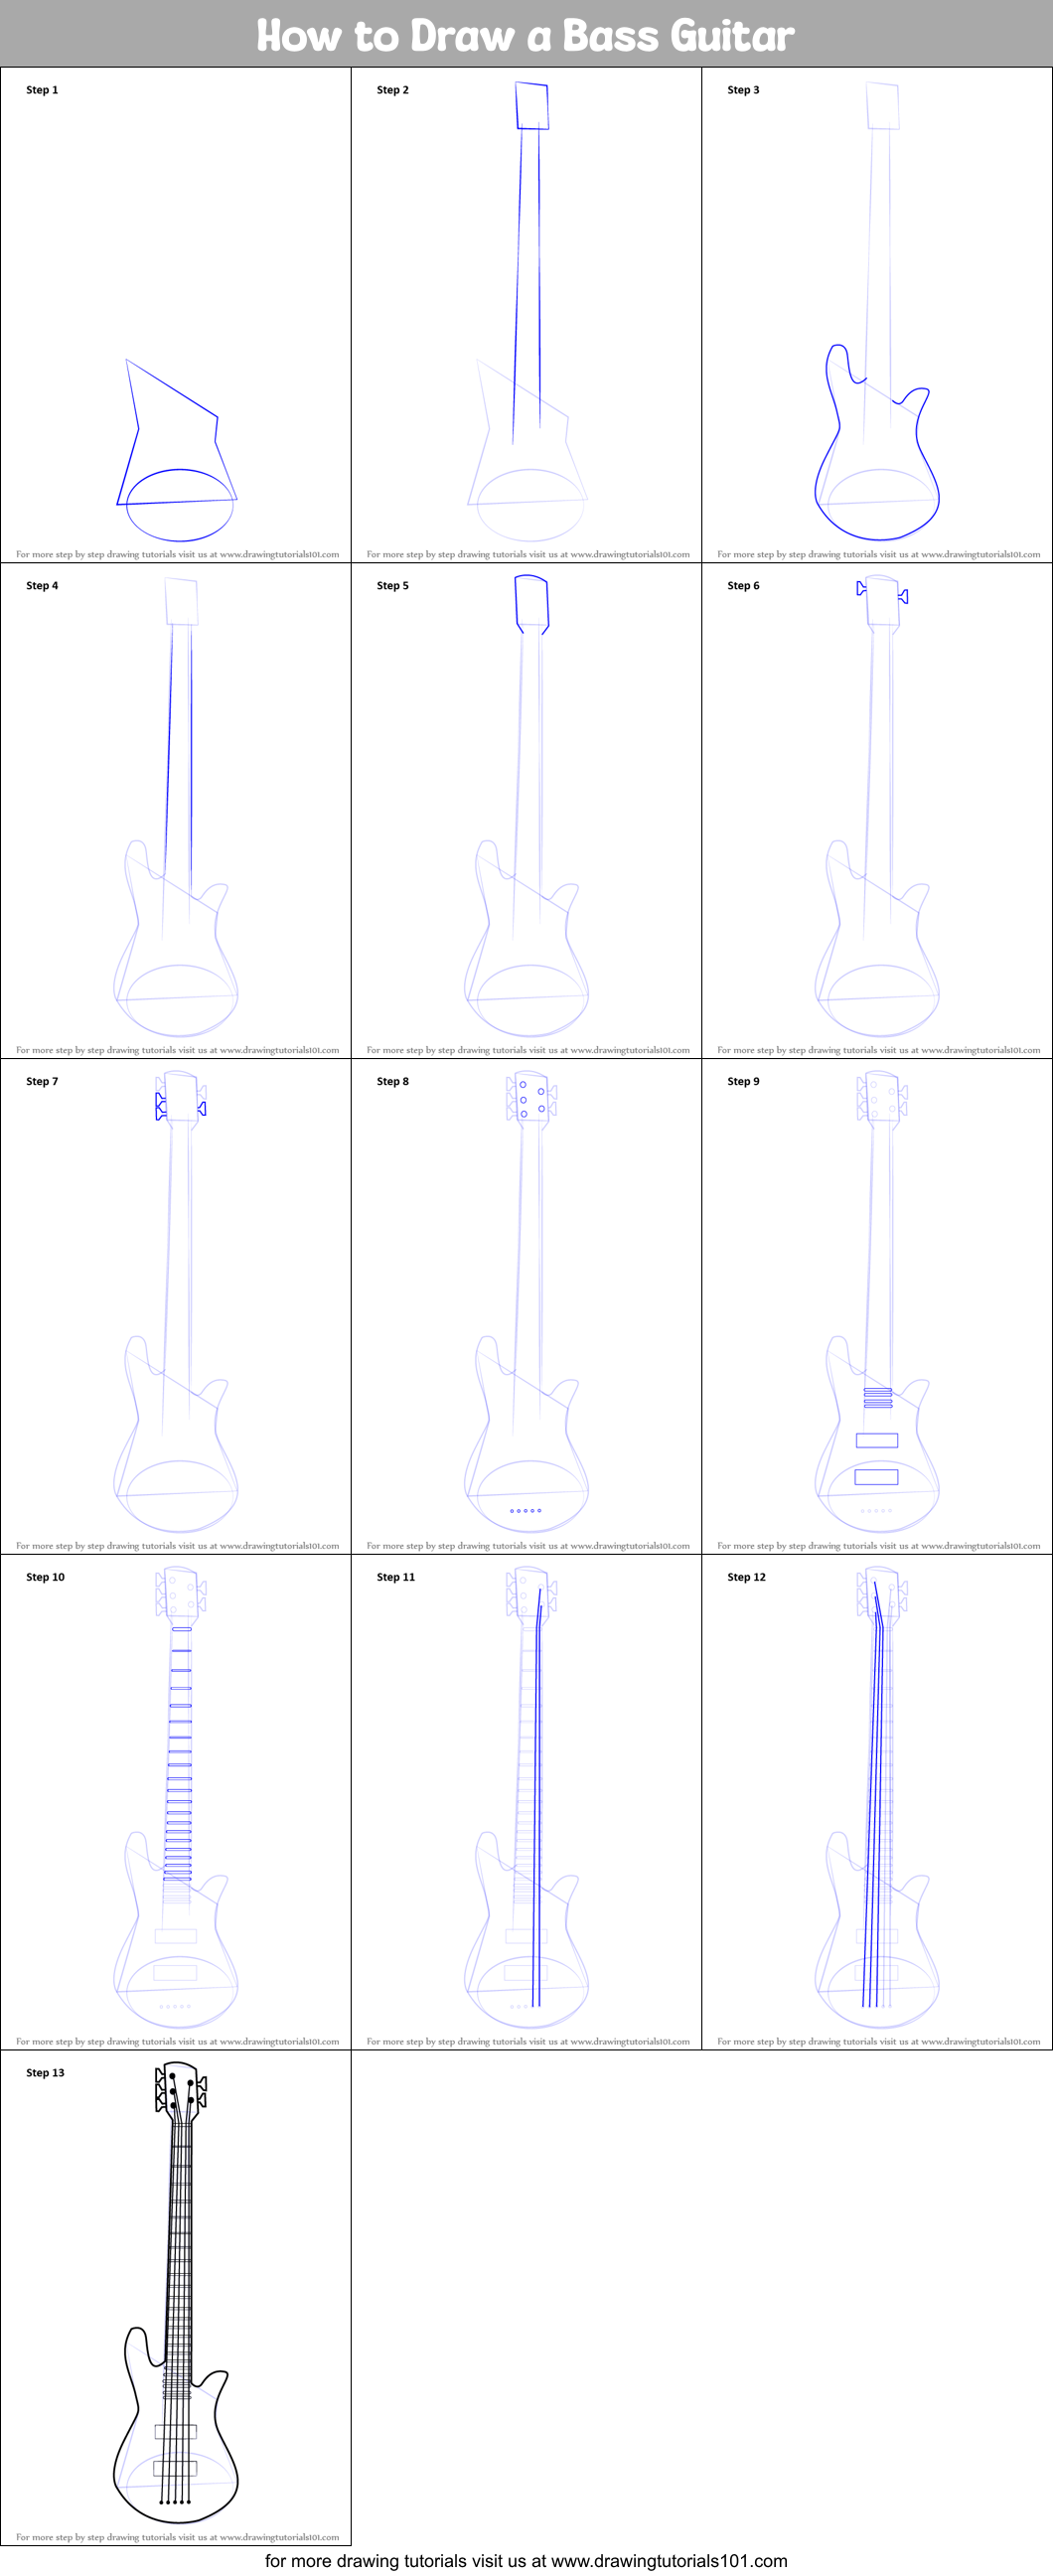 How to Draw a Bass Guitar printable step by step drawing